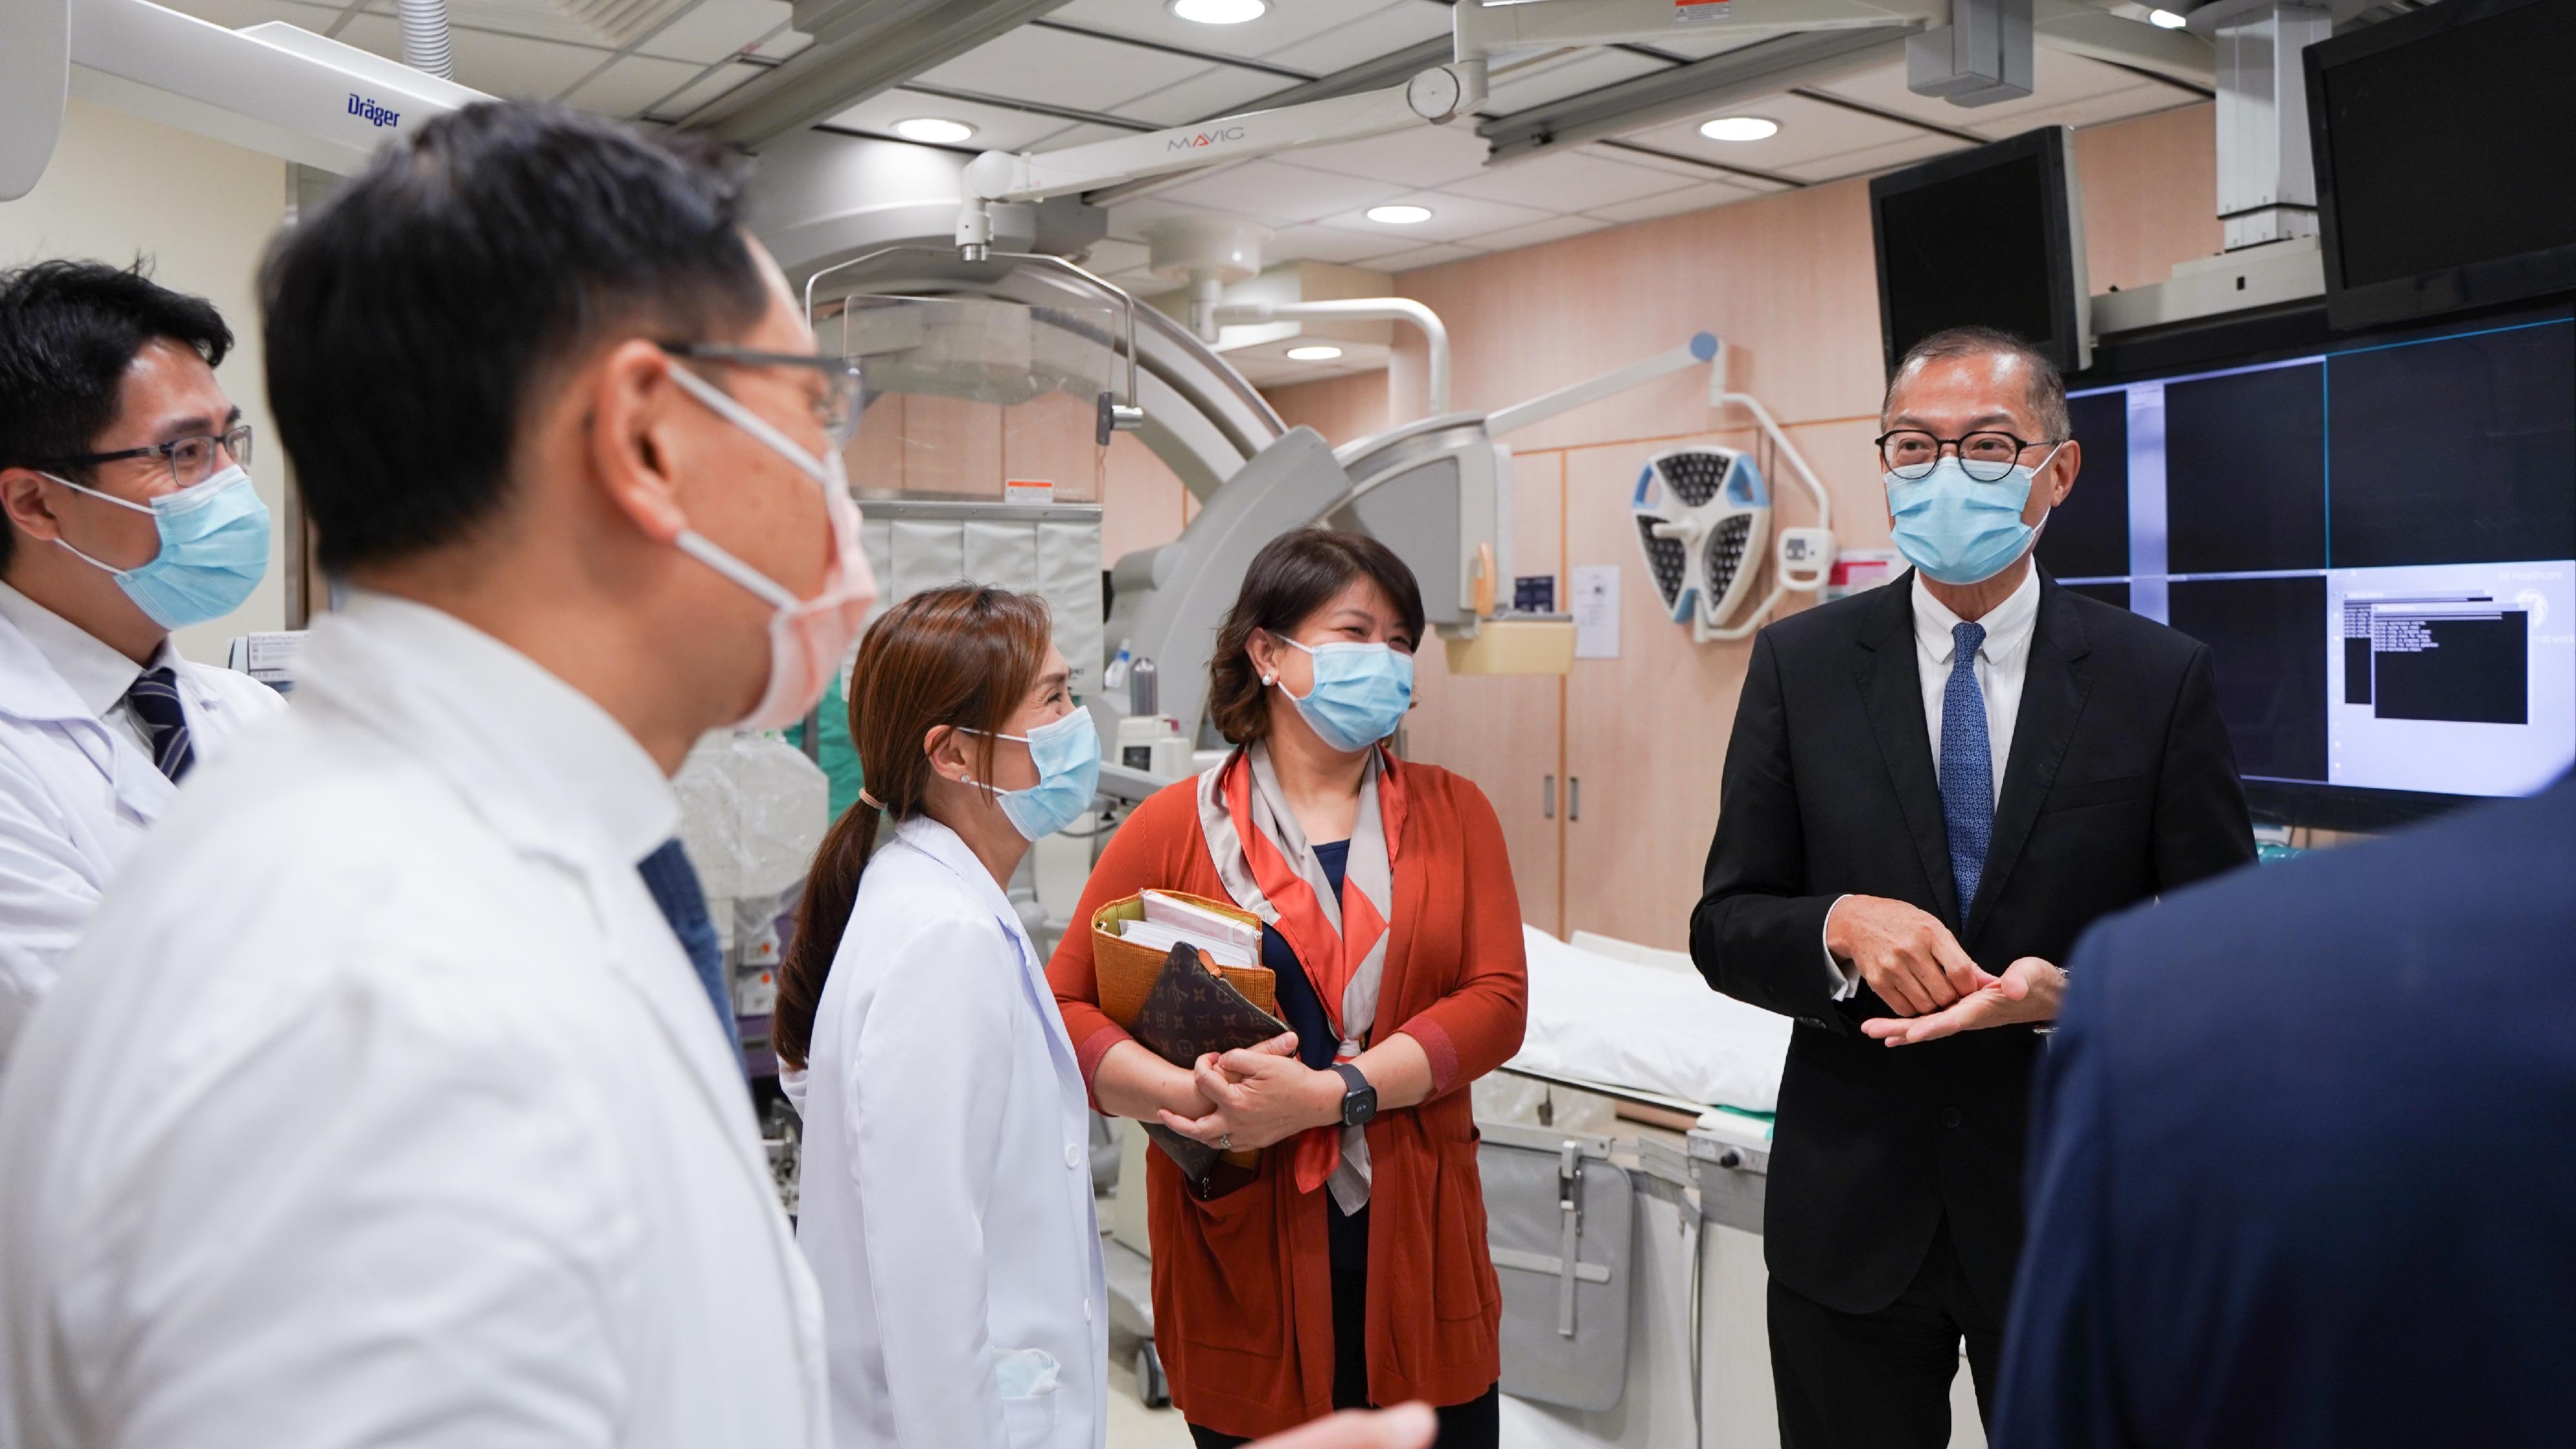 The Secretary for Health, Professor Lo Chung-mau, visited the Queen Mary Hospital today (August 8). Photo shows Professor Lo (first right) and the Under Secretary for Health, Dr Libby Lee (second right); visiting the Cardiac Catheterization Laboratory of the hospital with the Cluster Chief Executive of Hong Kong West Cluster of the Hospital Authority, Dr Theresa Li (third right).